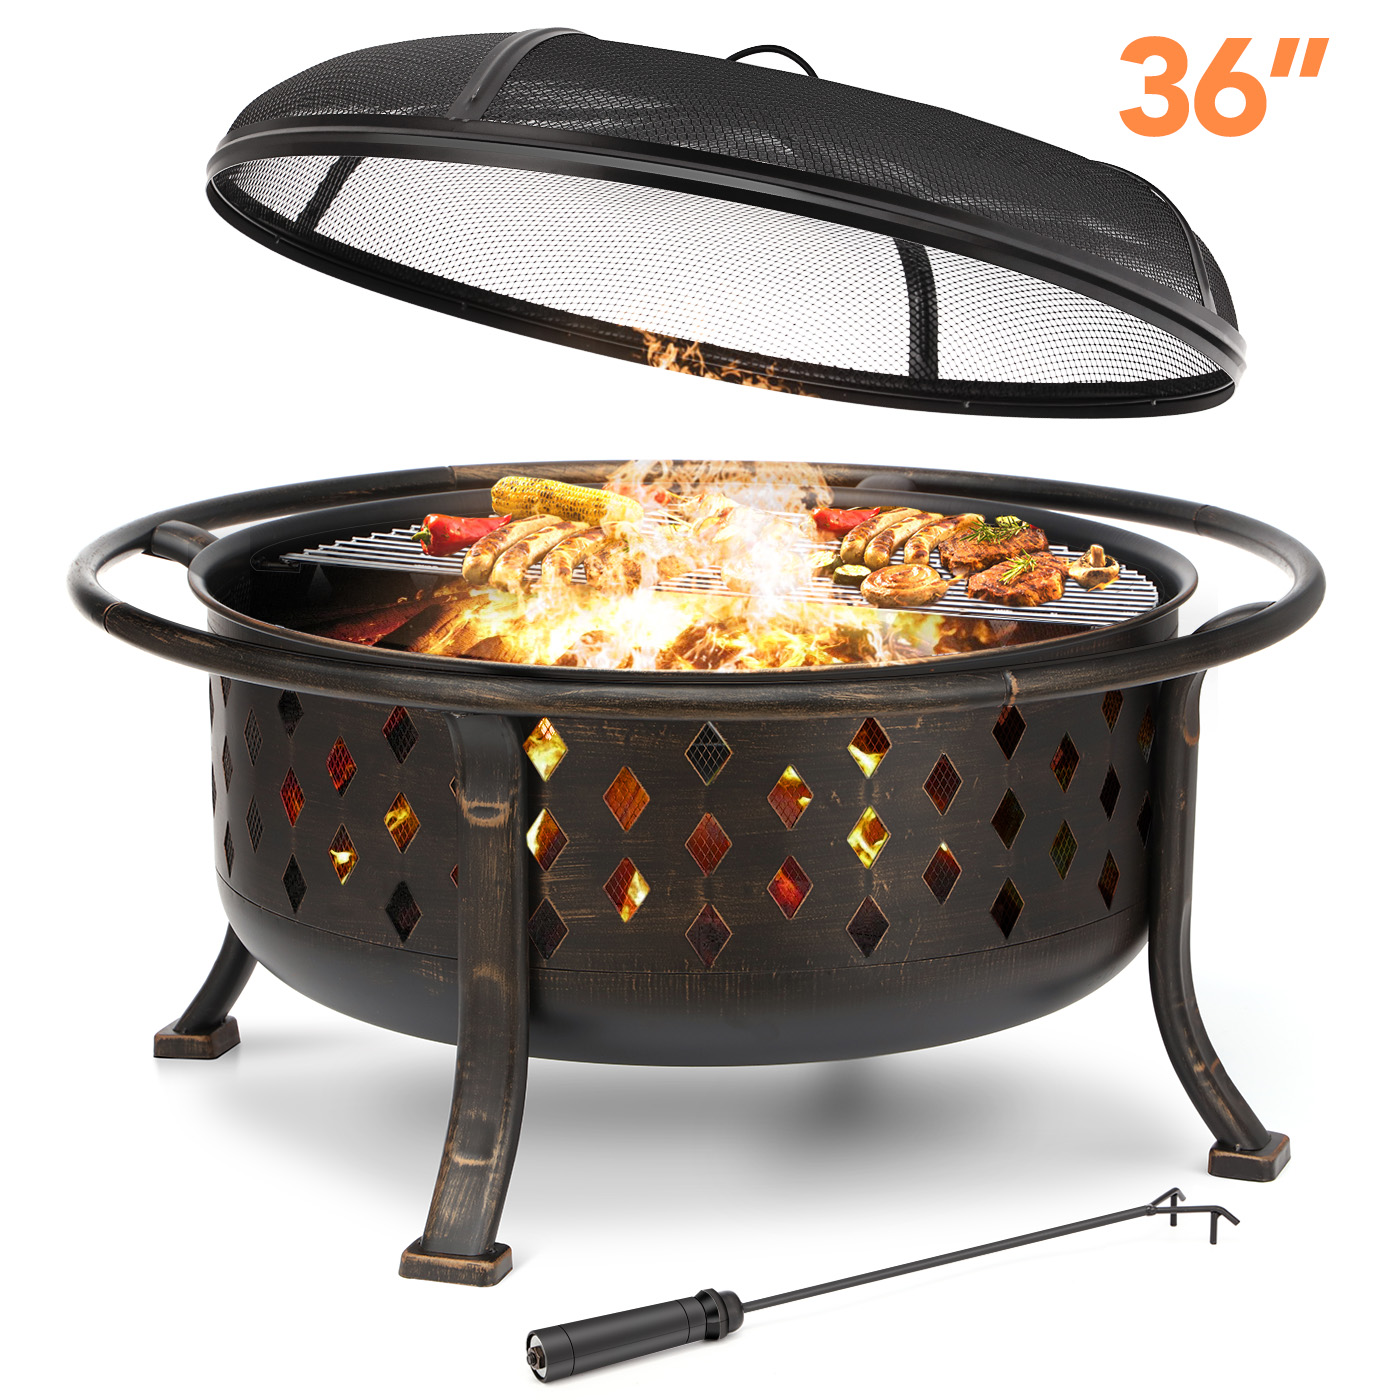 Singlyfire 36 inch Fire Pit for Outside Wood Burning Fire Pit Large Deep Fire Bowl for Camping Picnic Bonfire Patio Outside Backyard Garden Bonfire Pit with Cooking Grill Grate Spark Screen Log Grate - image 1 of 9